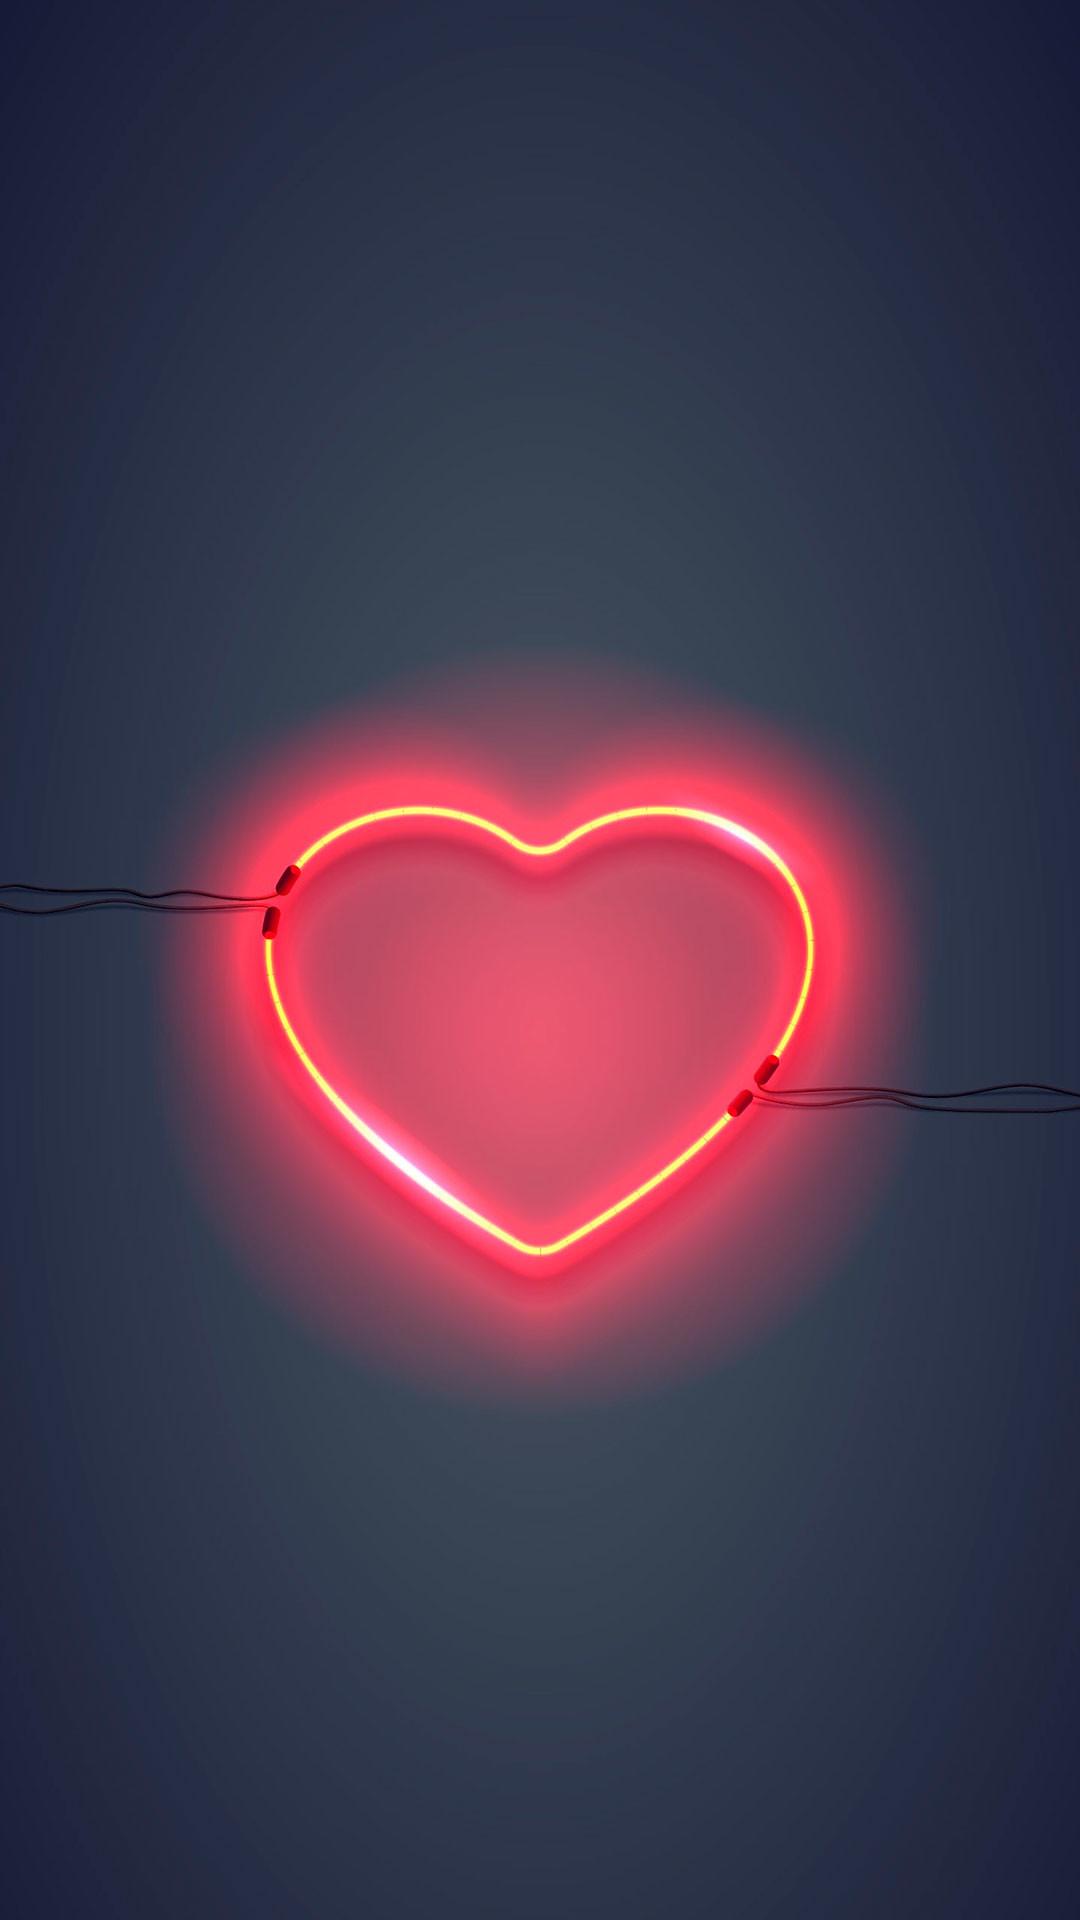 A neon heart on a dark background - Light red